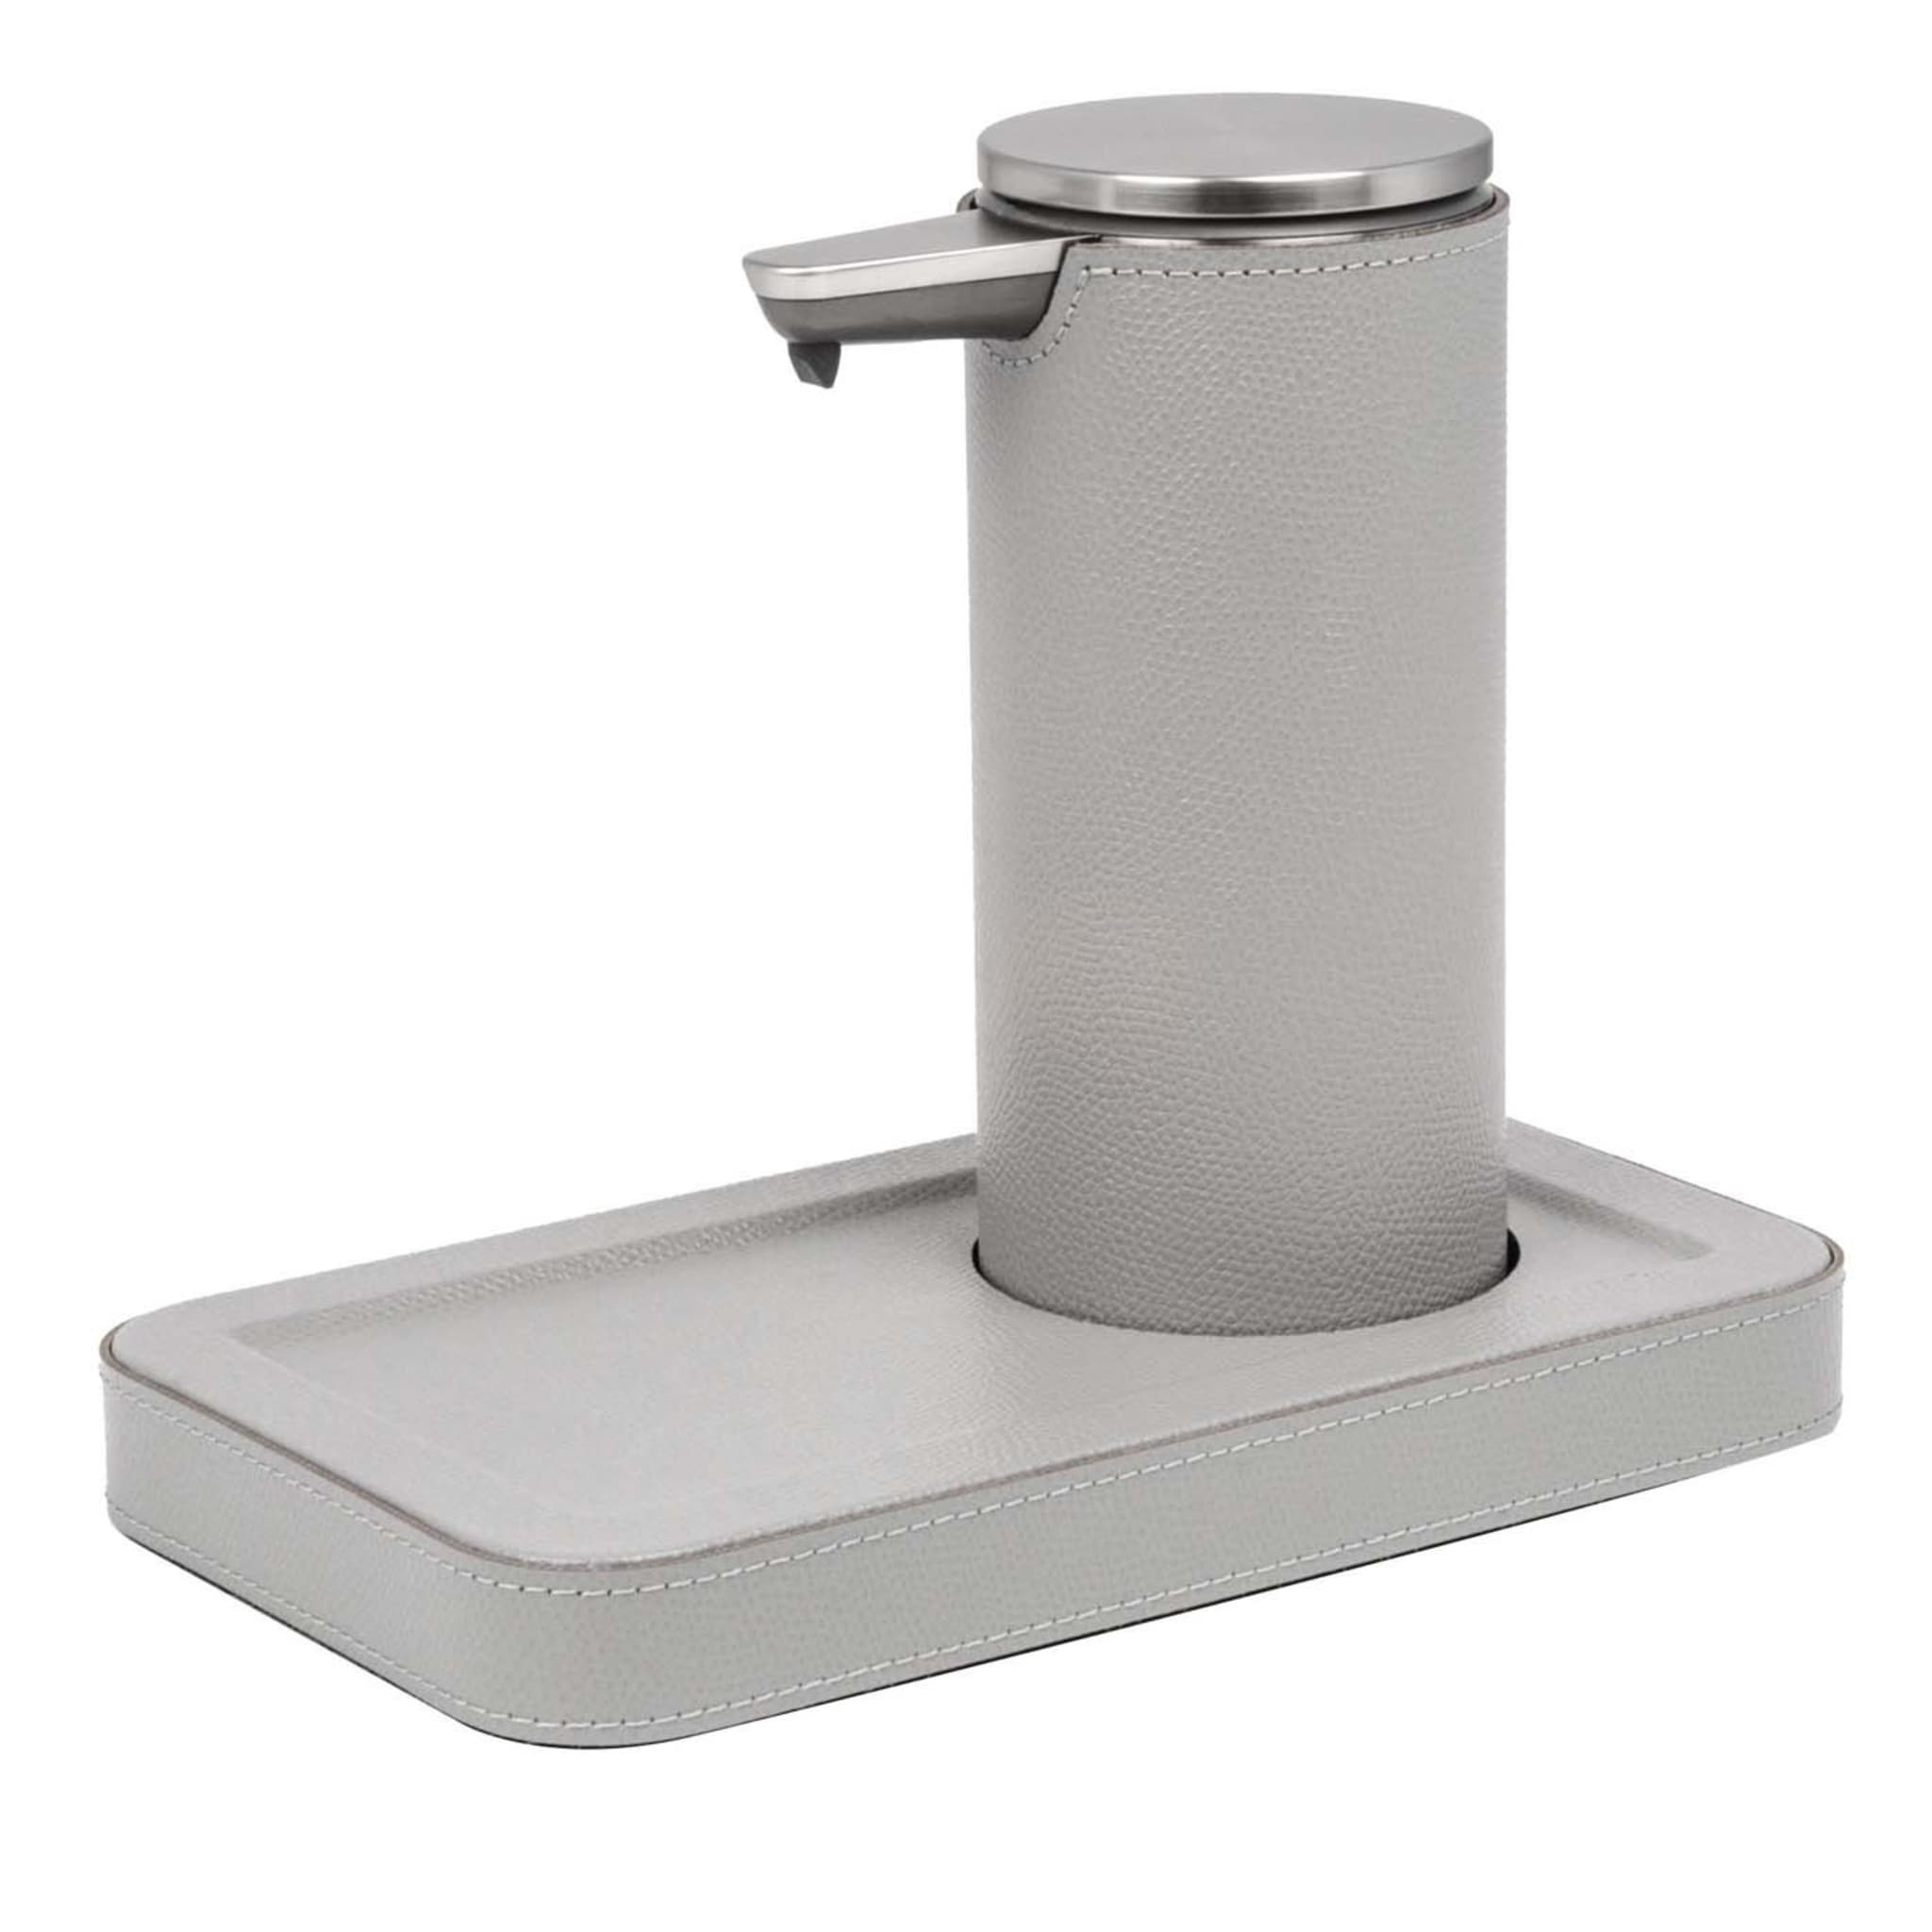 Igea Light Gray Leather Automatic Dispenser with Tray - Main view